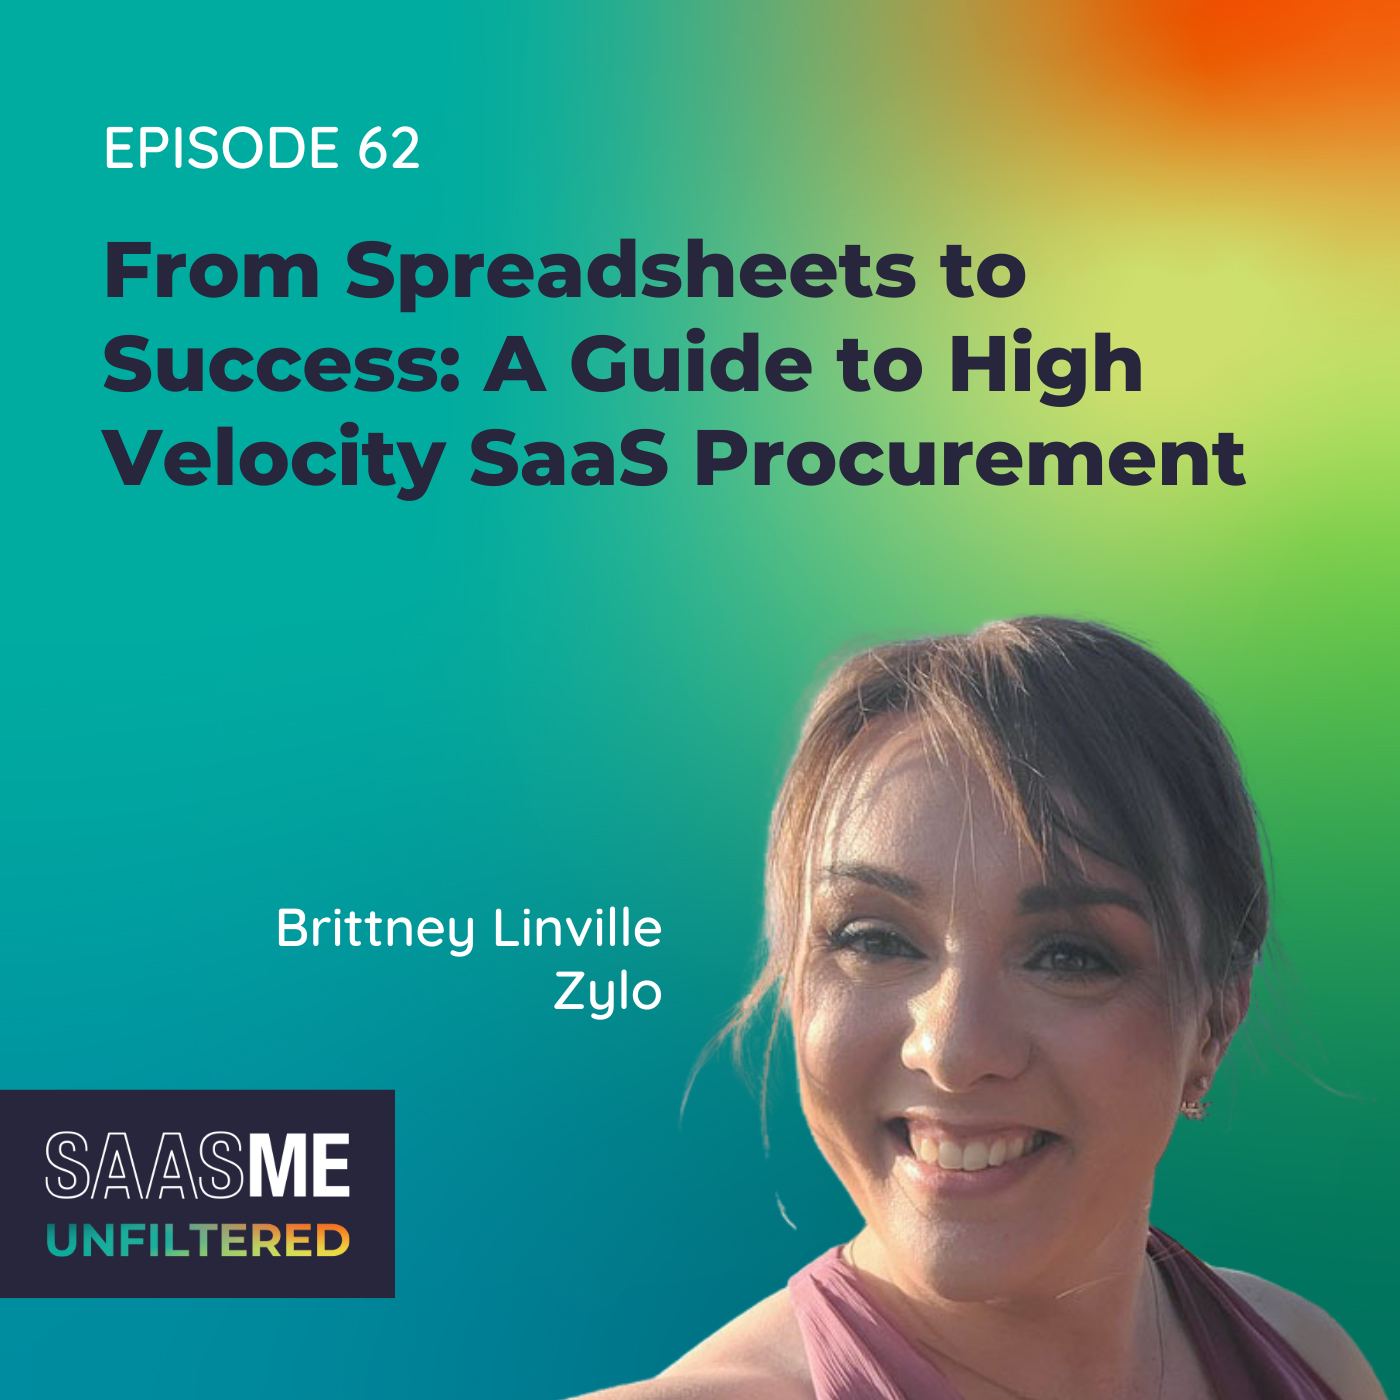 From Spreadsheets to Success: A Guide to High-Velocity SaaS Procurement with Brittney Linville (Zylo)